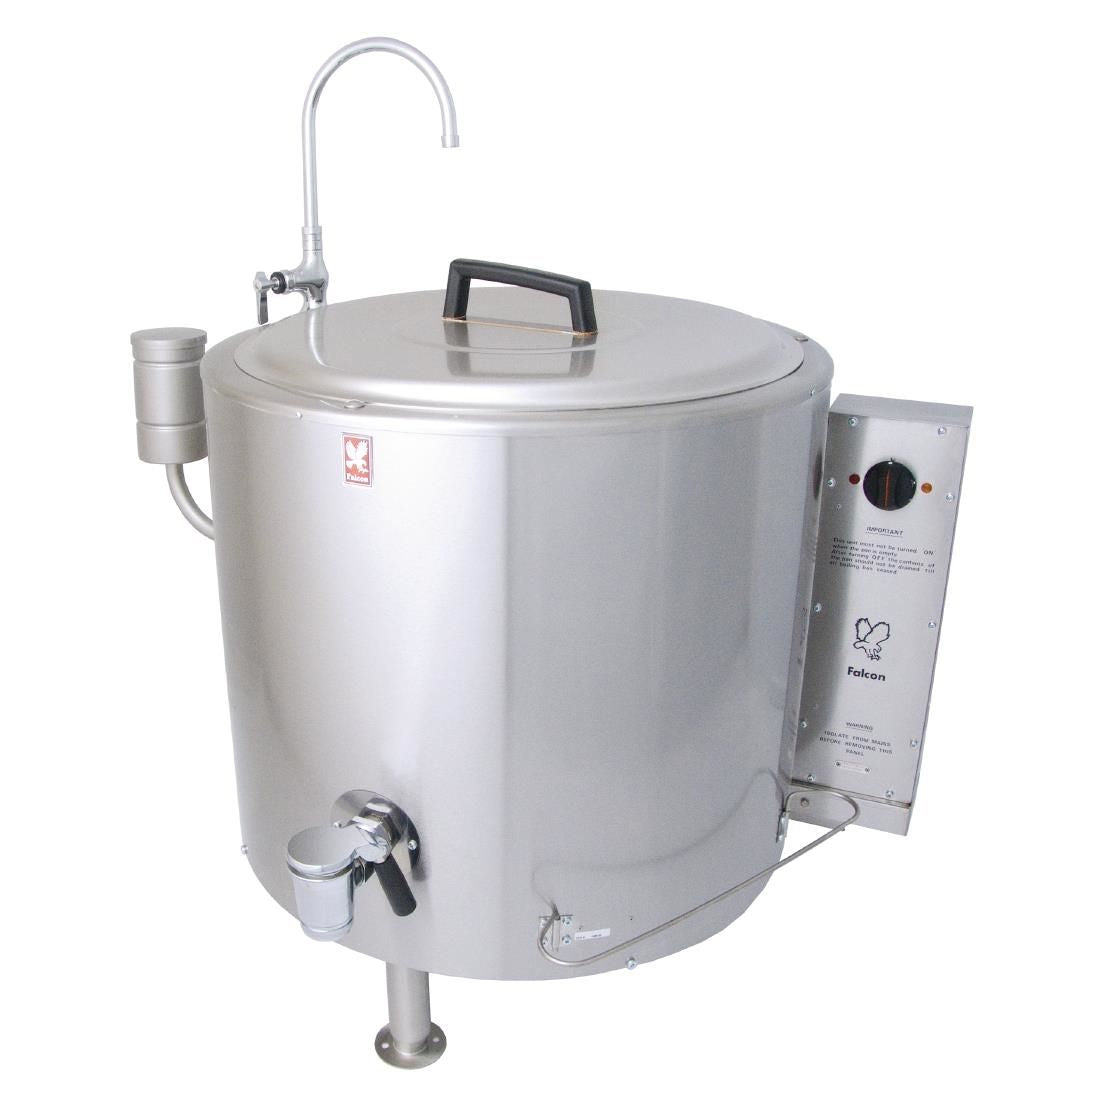 Falcon Dominator Round-Cased Boiling Pan E2078-90 JD Catering Equipment Solutions Ltd